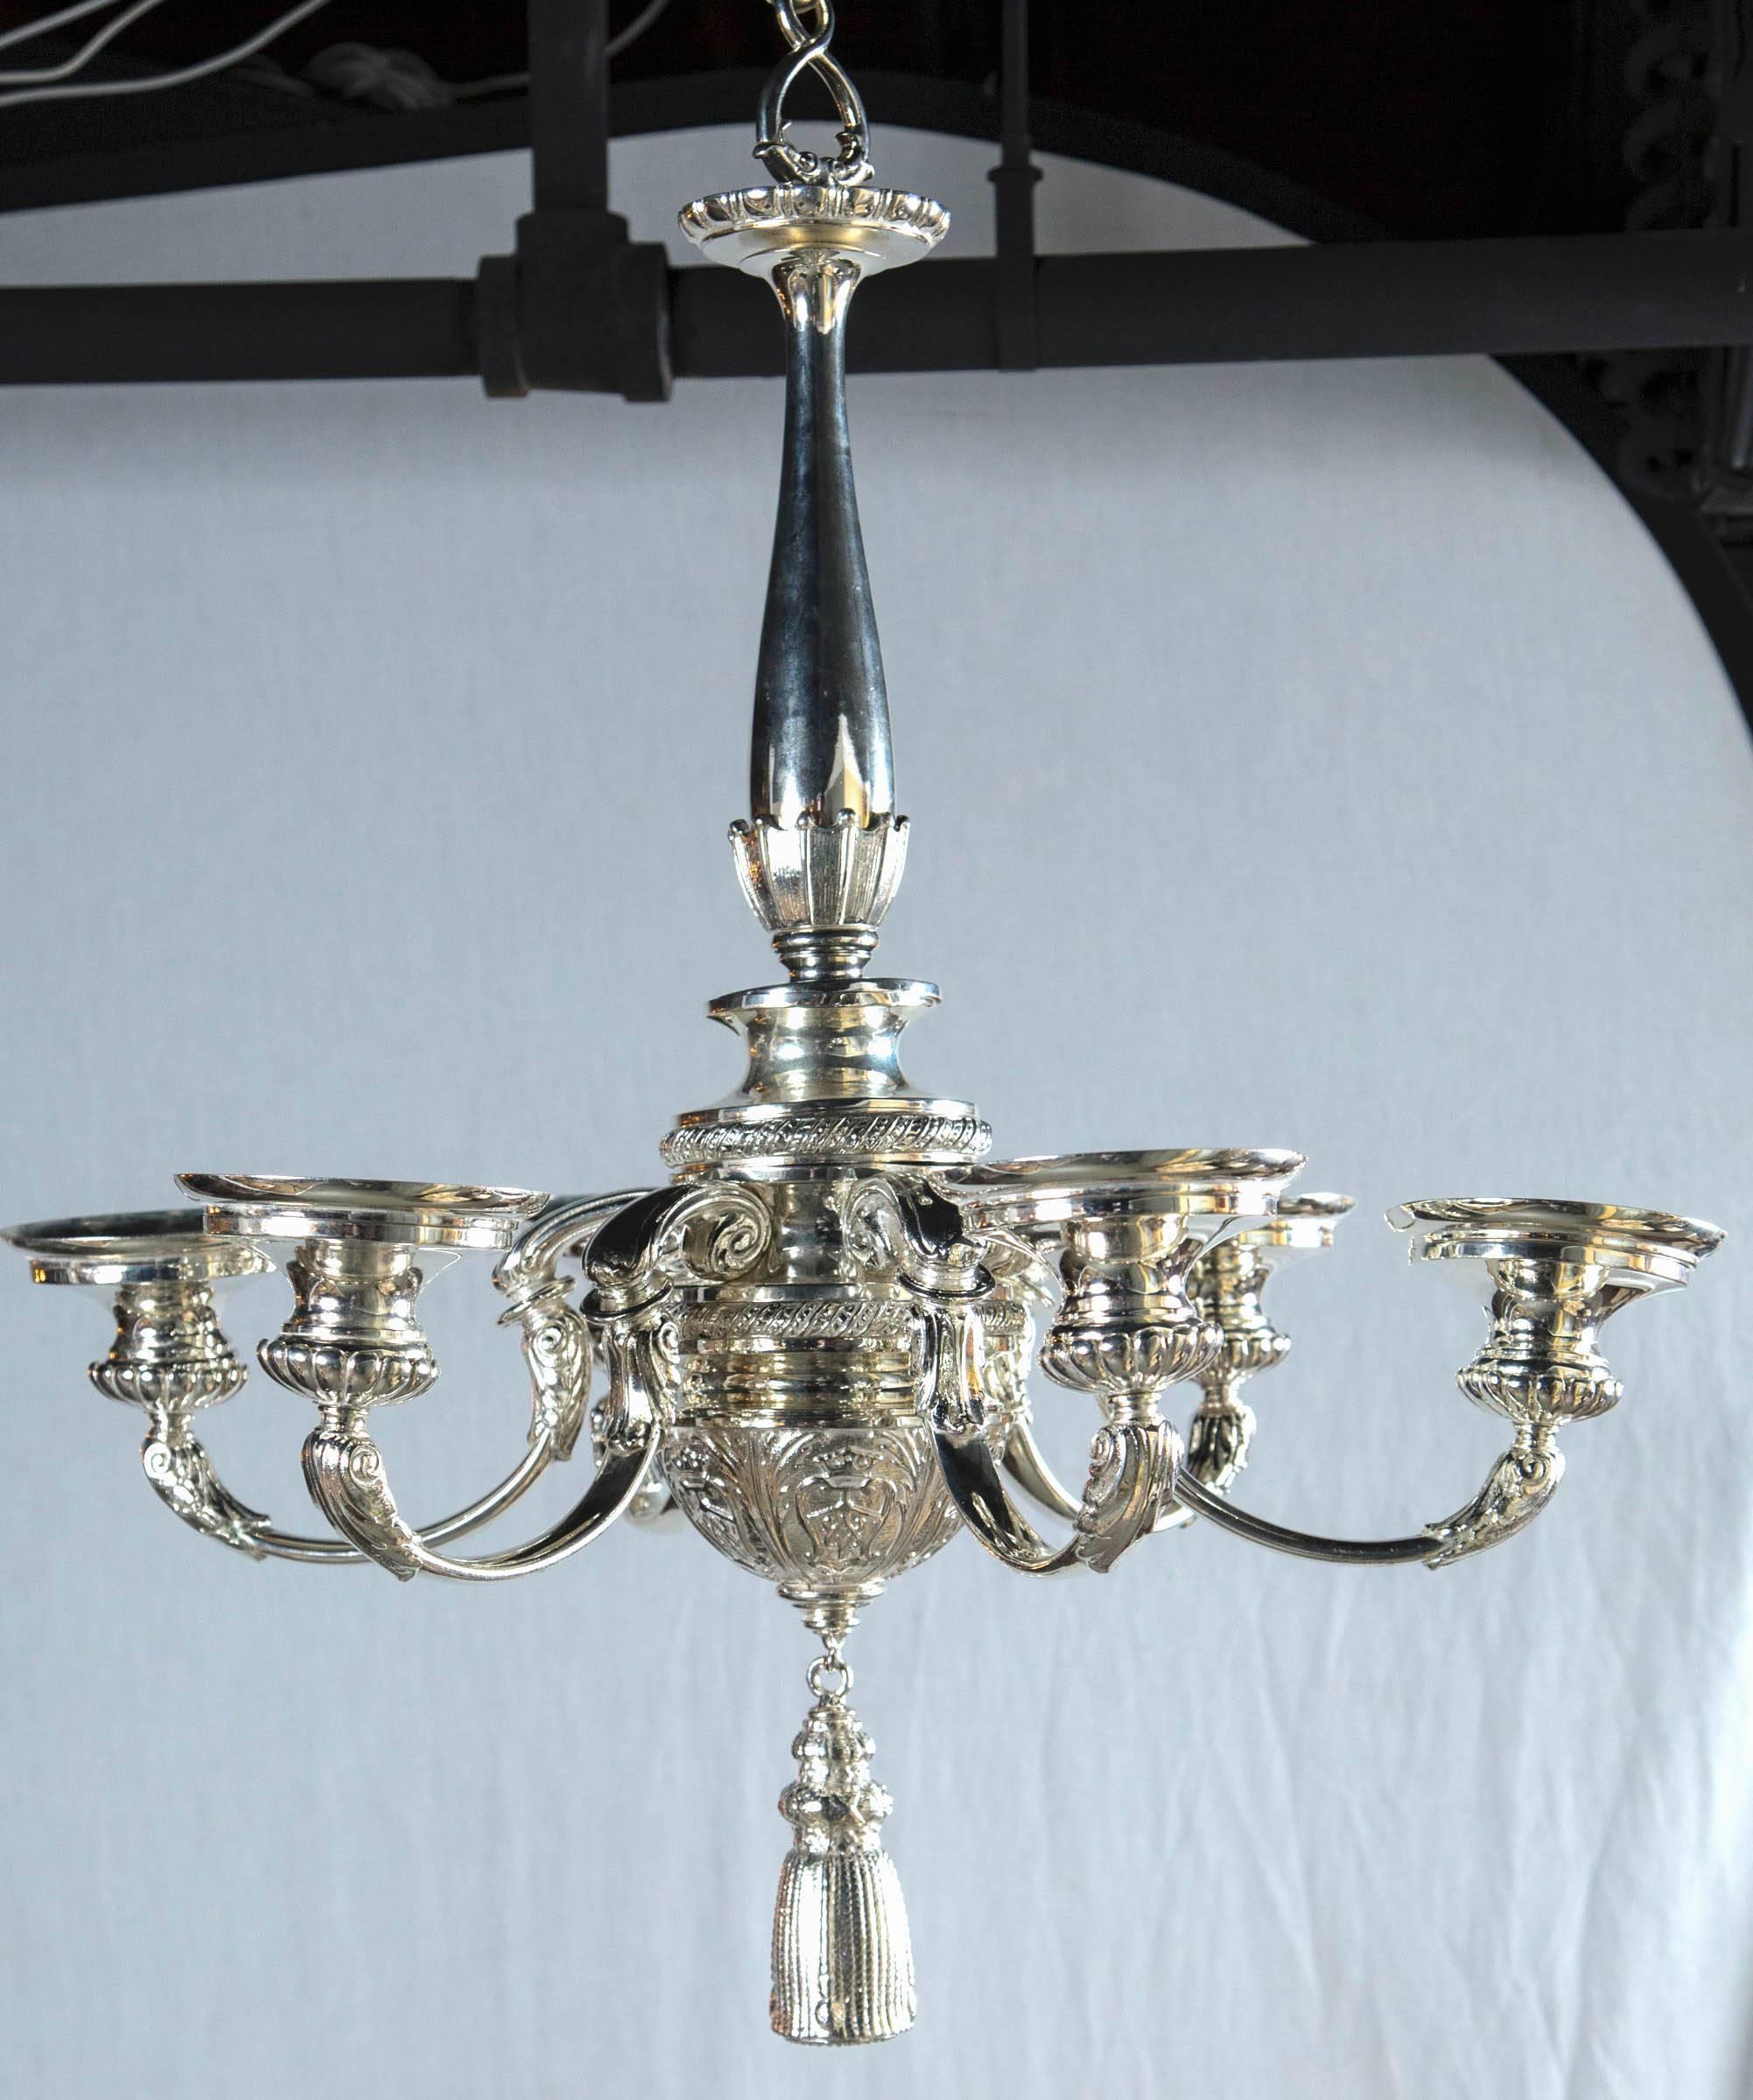 A silver plated neoclassic style Caldwell chandelier, circa 1930.